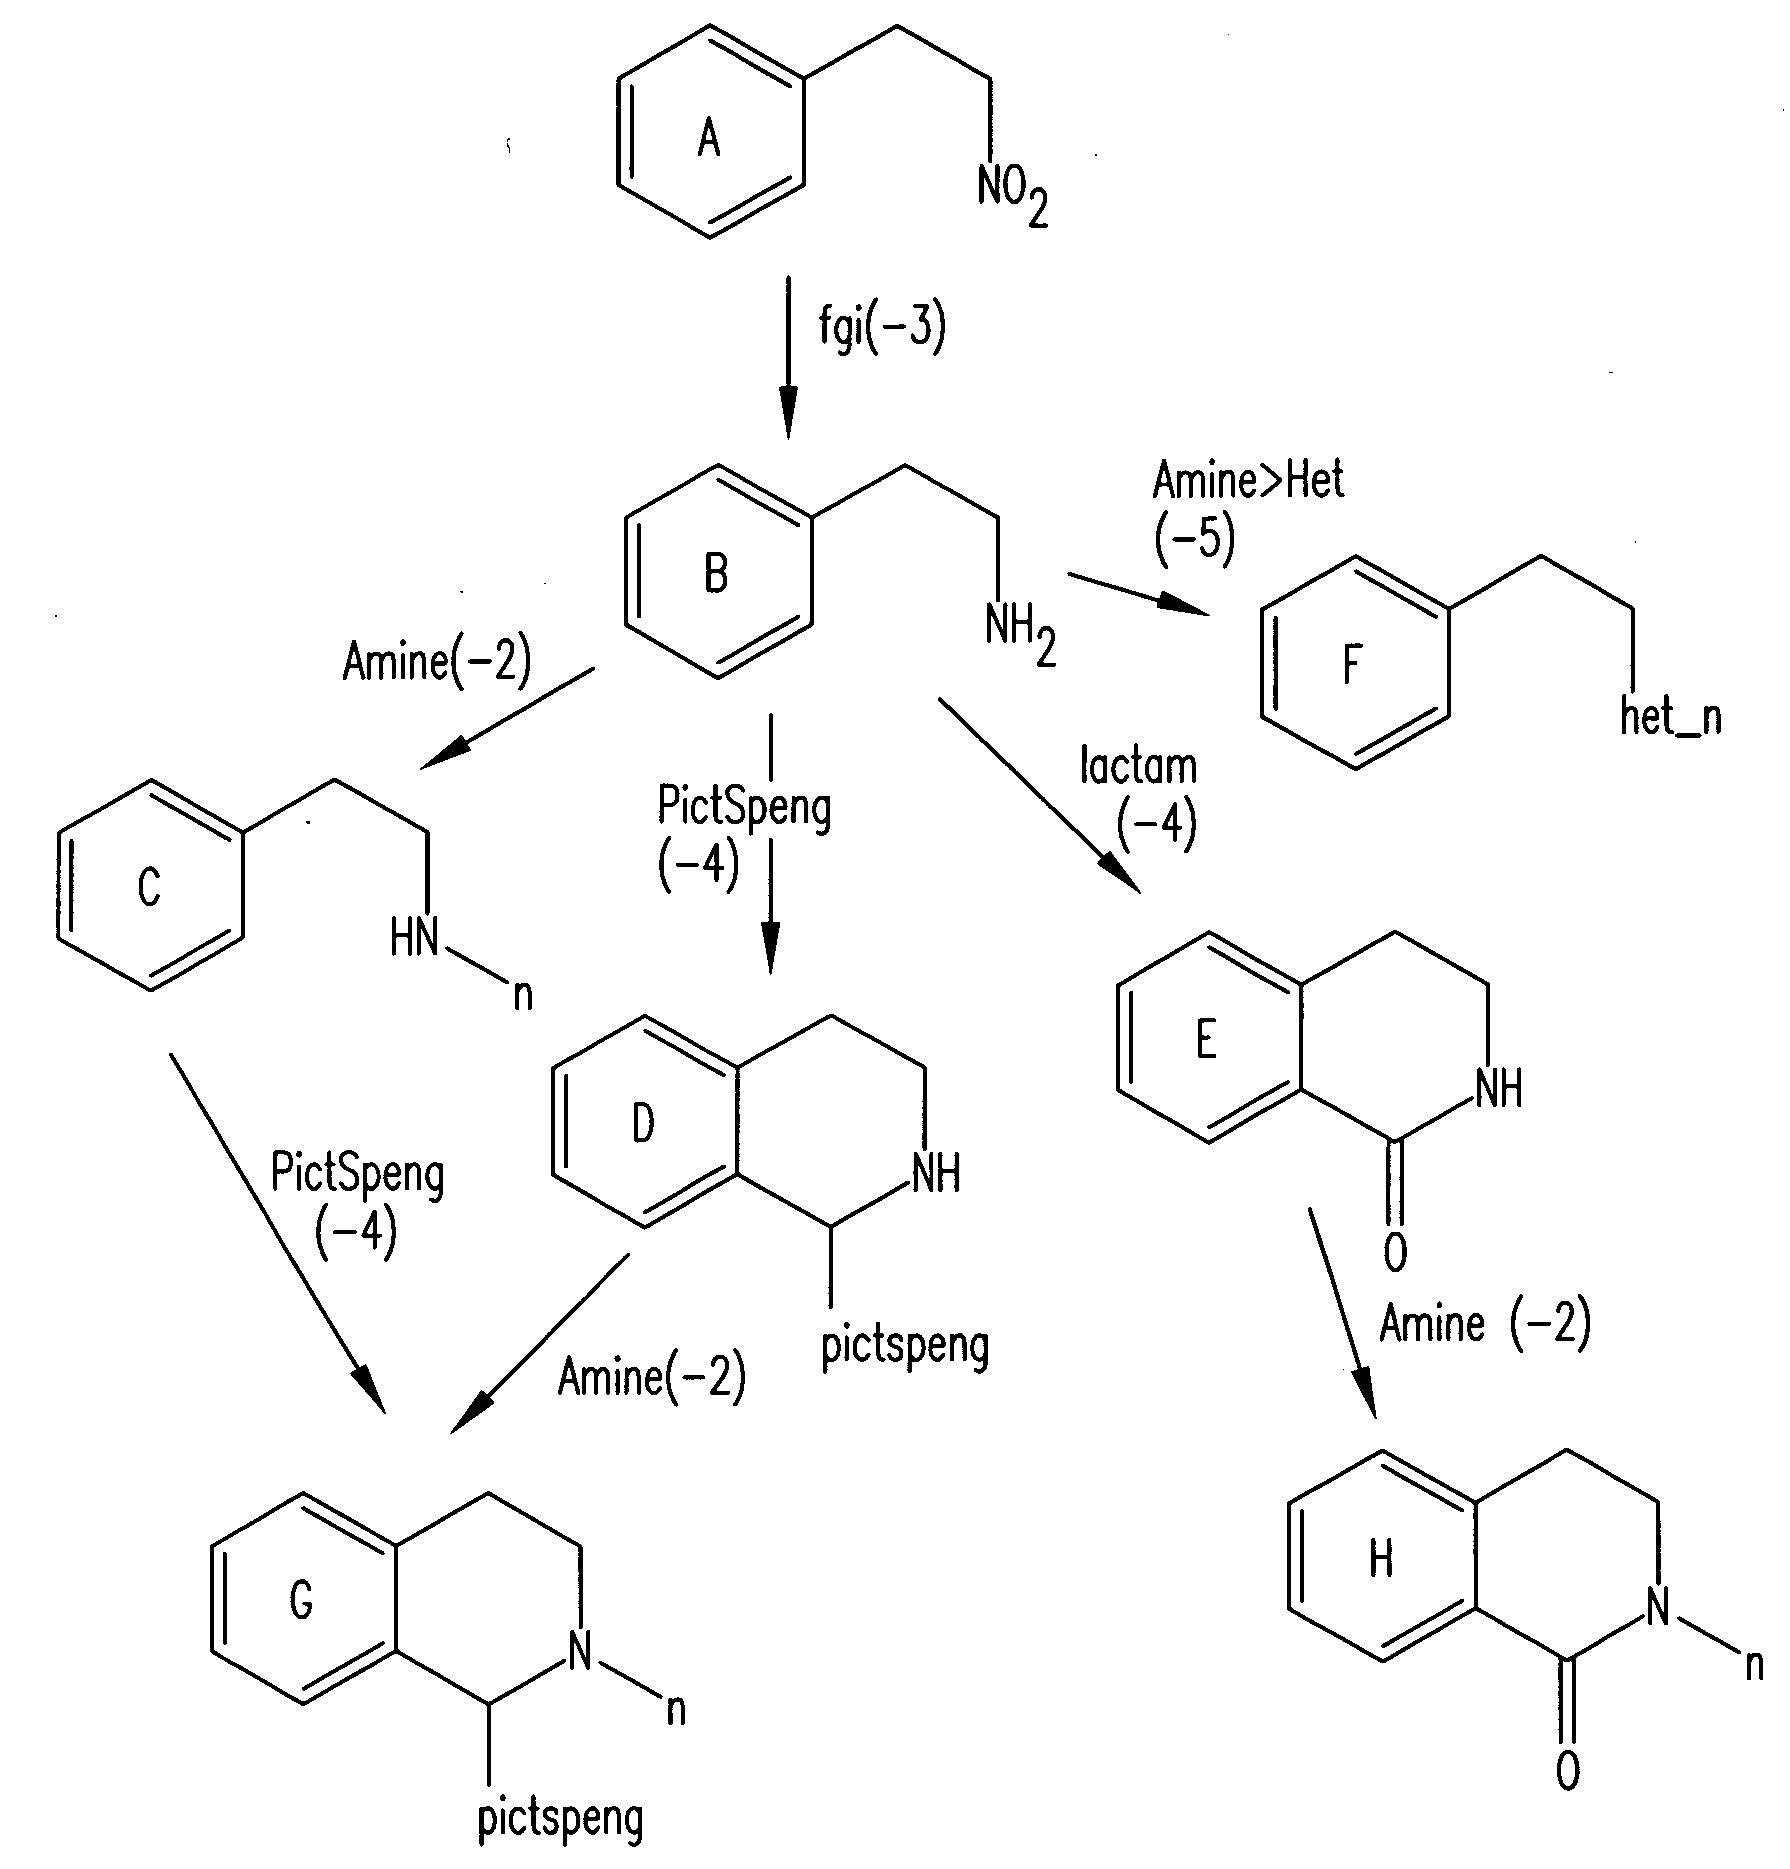 Forward synthetic synthon generation and its useto identify molecules similar in 3 dimensional shape to pharmaceutical lead compounds